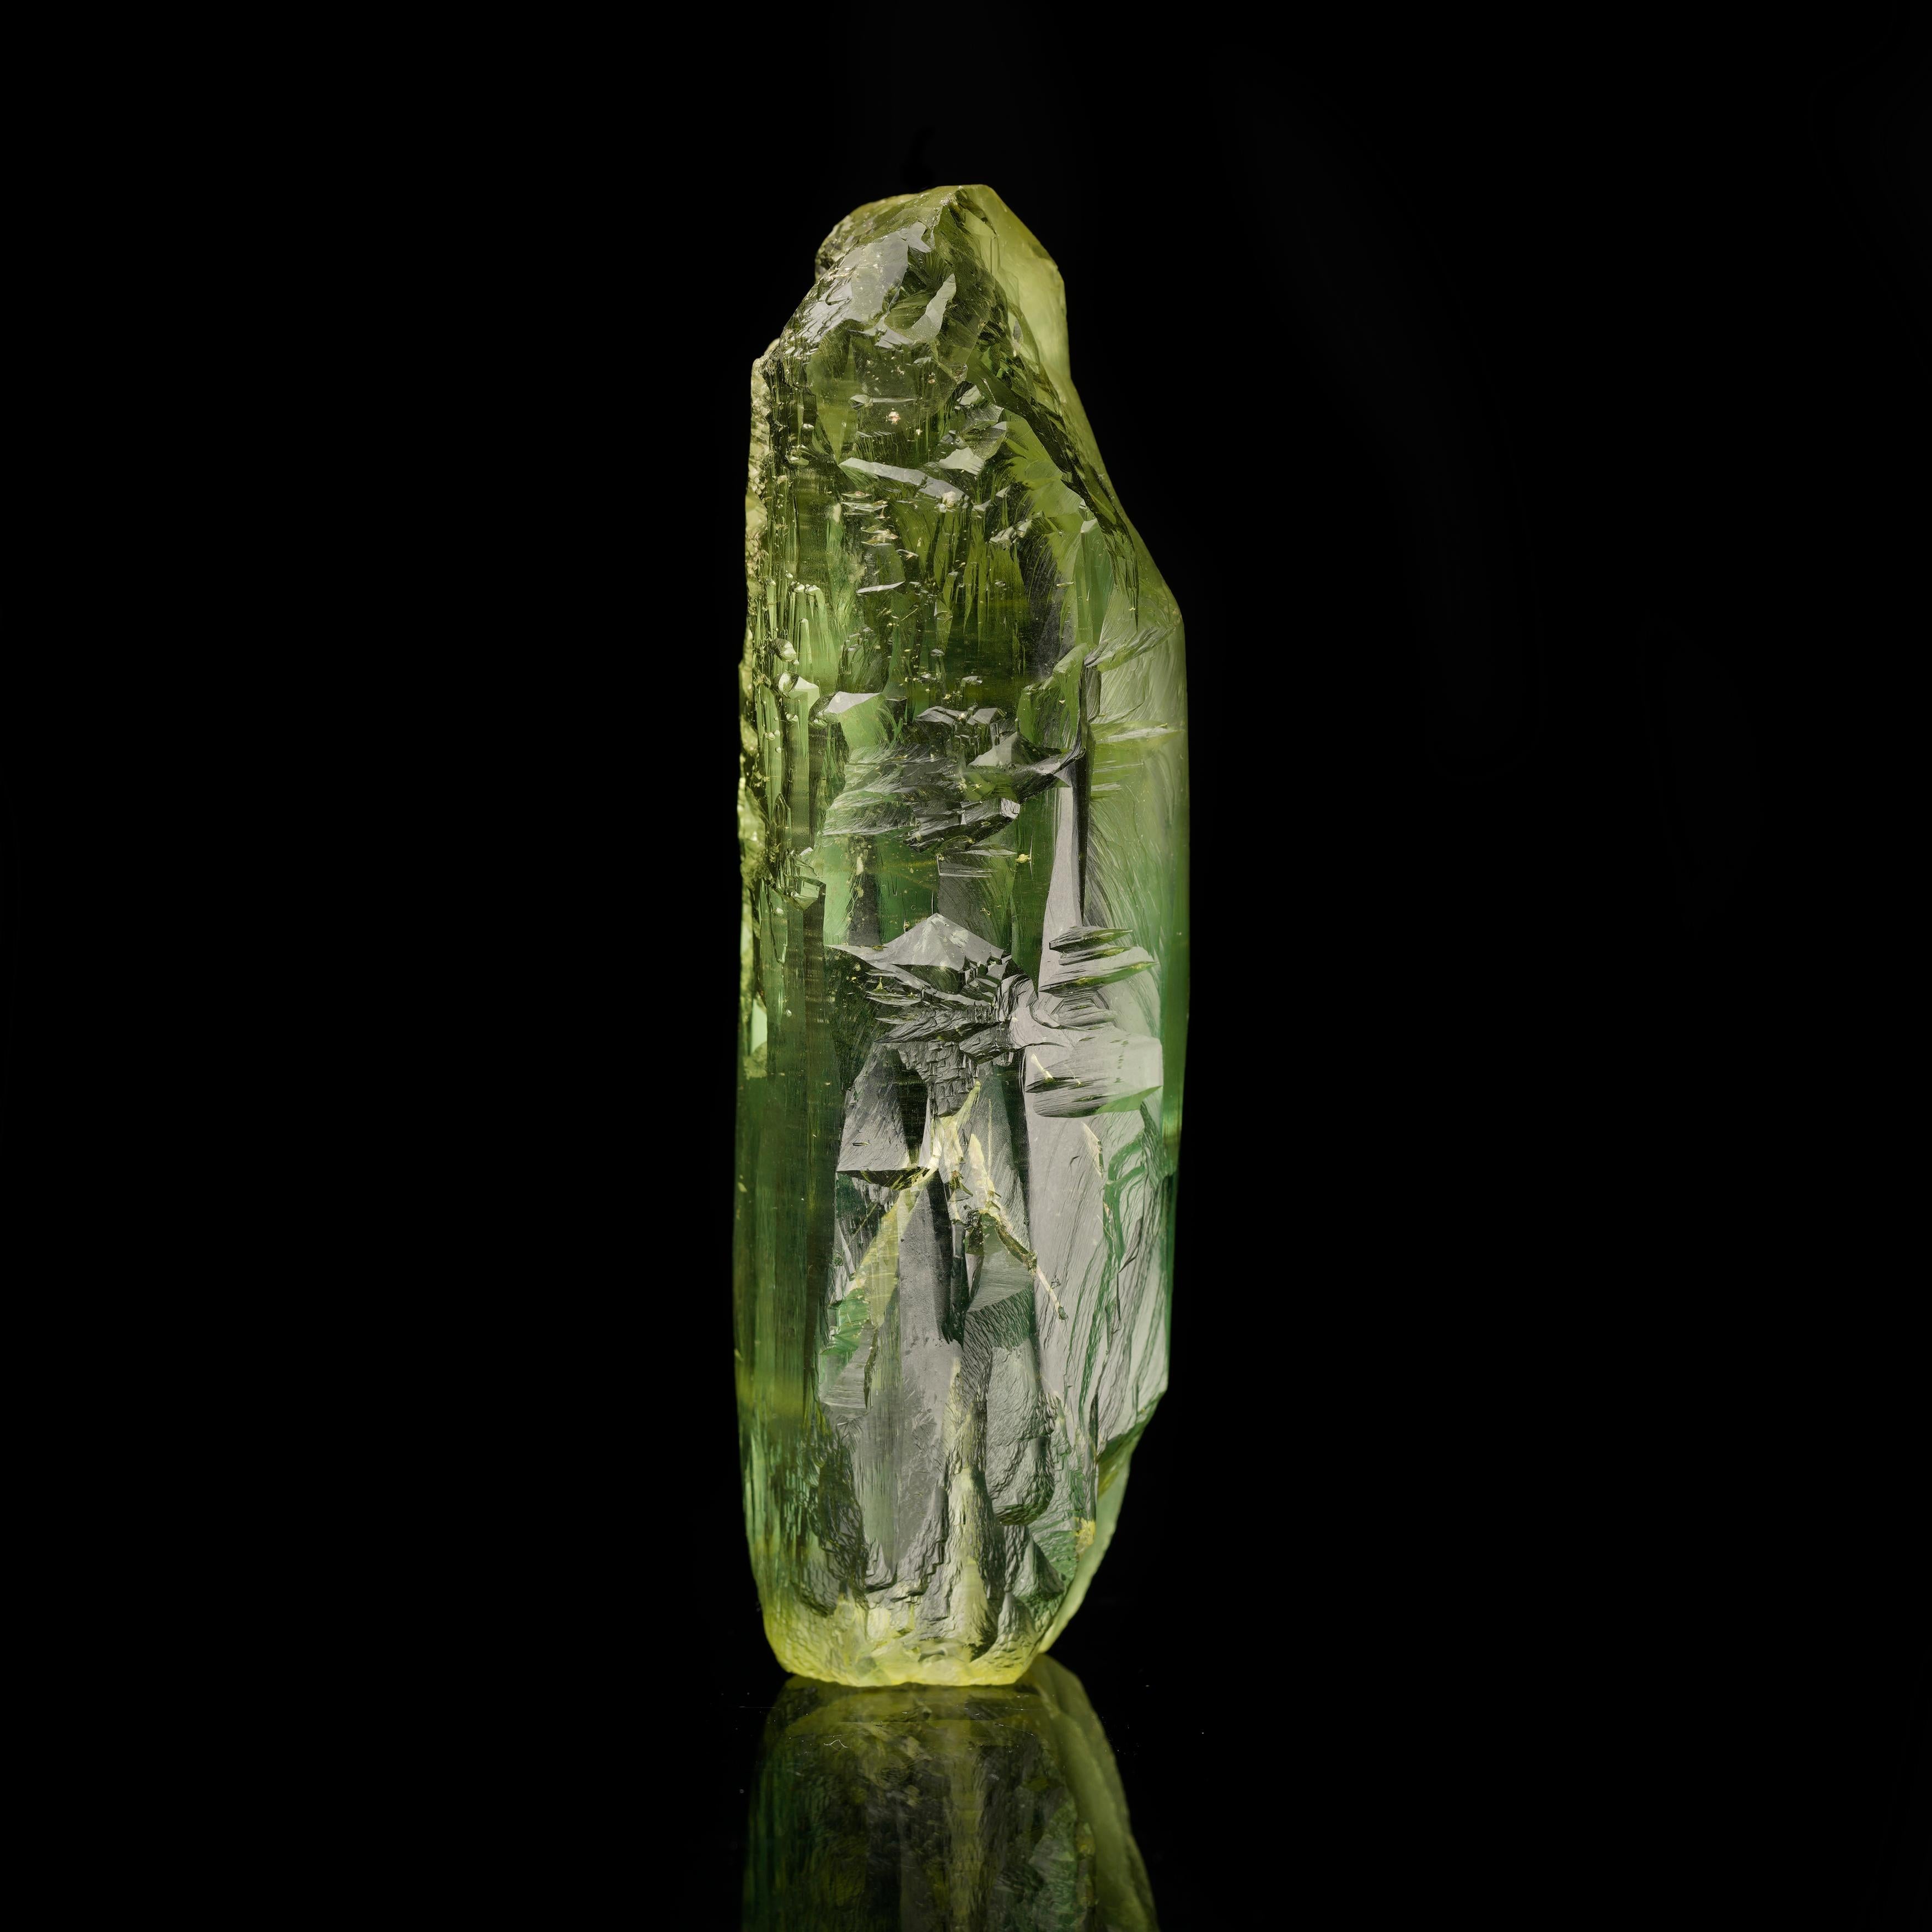 This stunning, gemmy finger of heliodor from the Ukraine features a lovely yellowish-green hue with incredible clarity and a rough-hewn appearance due to the gem mineral's characteristic  natural etching. A substantial find for the discerning